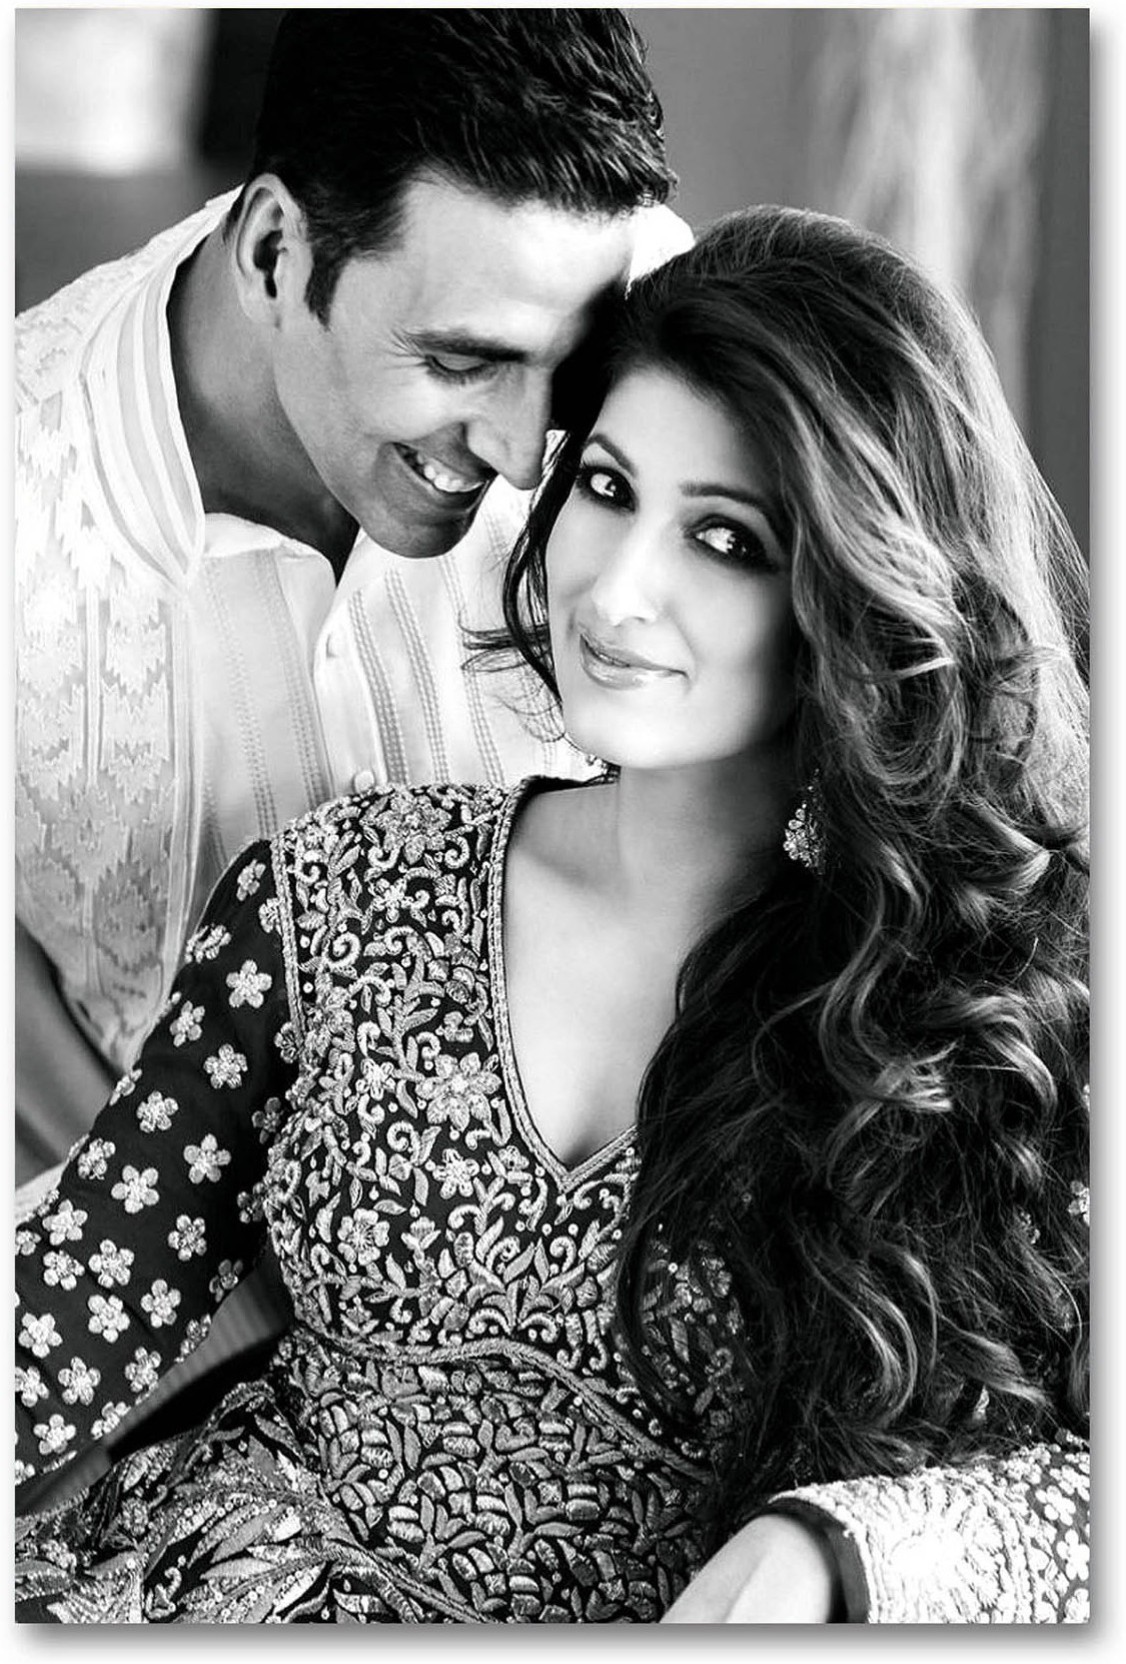 Bollywood Actors Wall Poster - Akshay Kumar And Twinkle Khanna , HD Wallpaper & Backgrounds